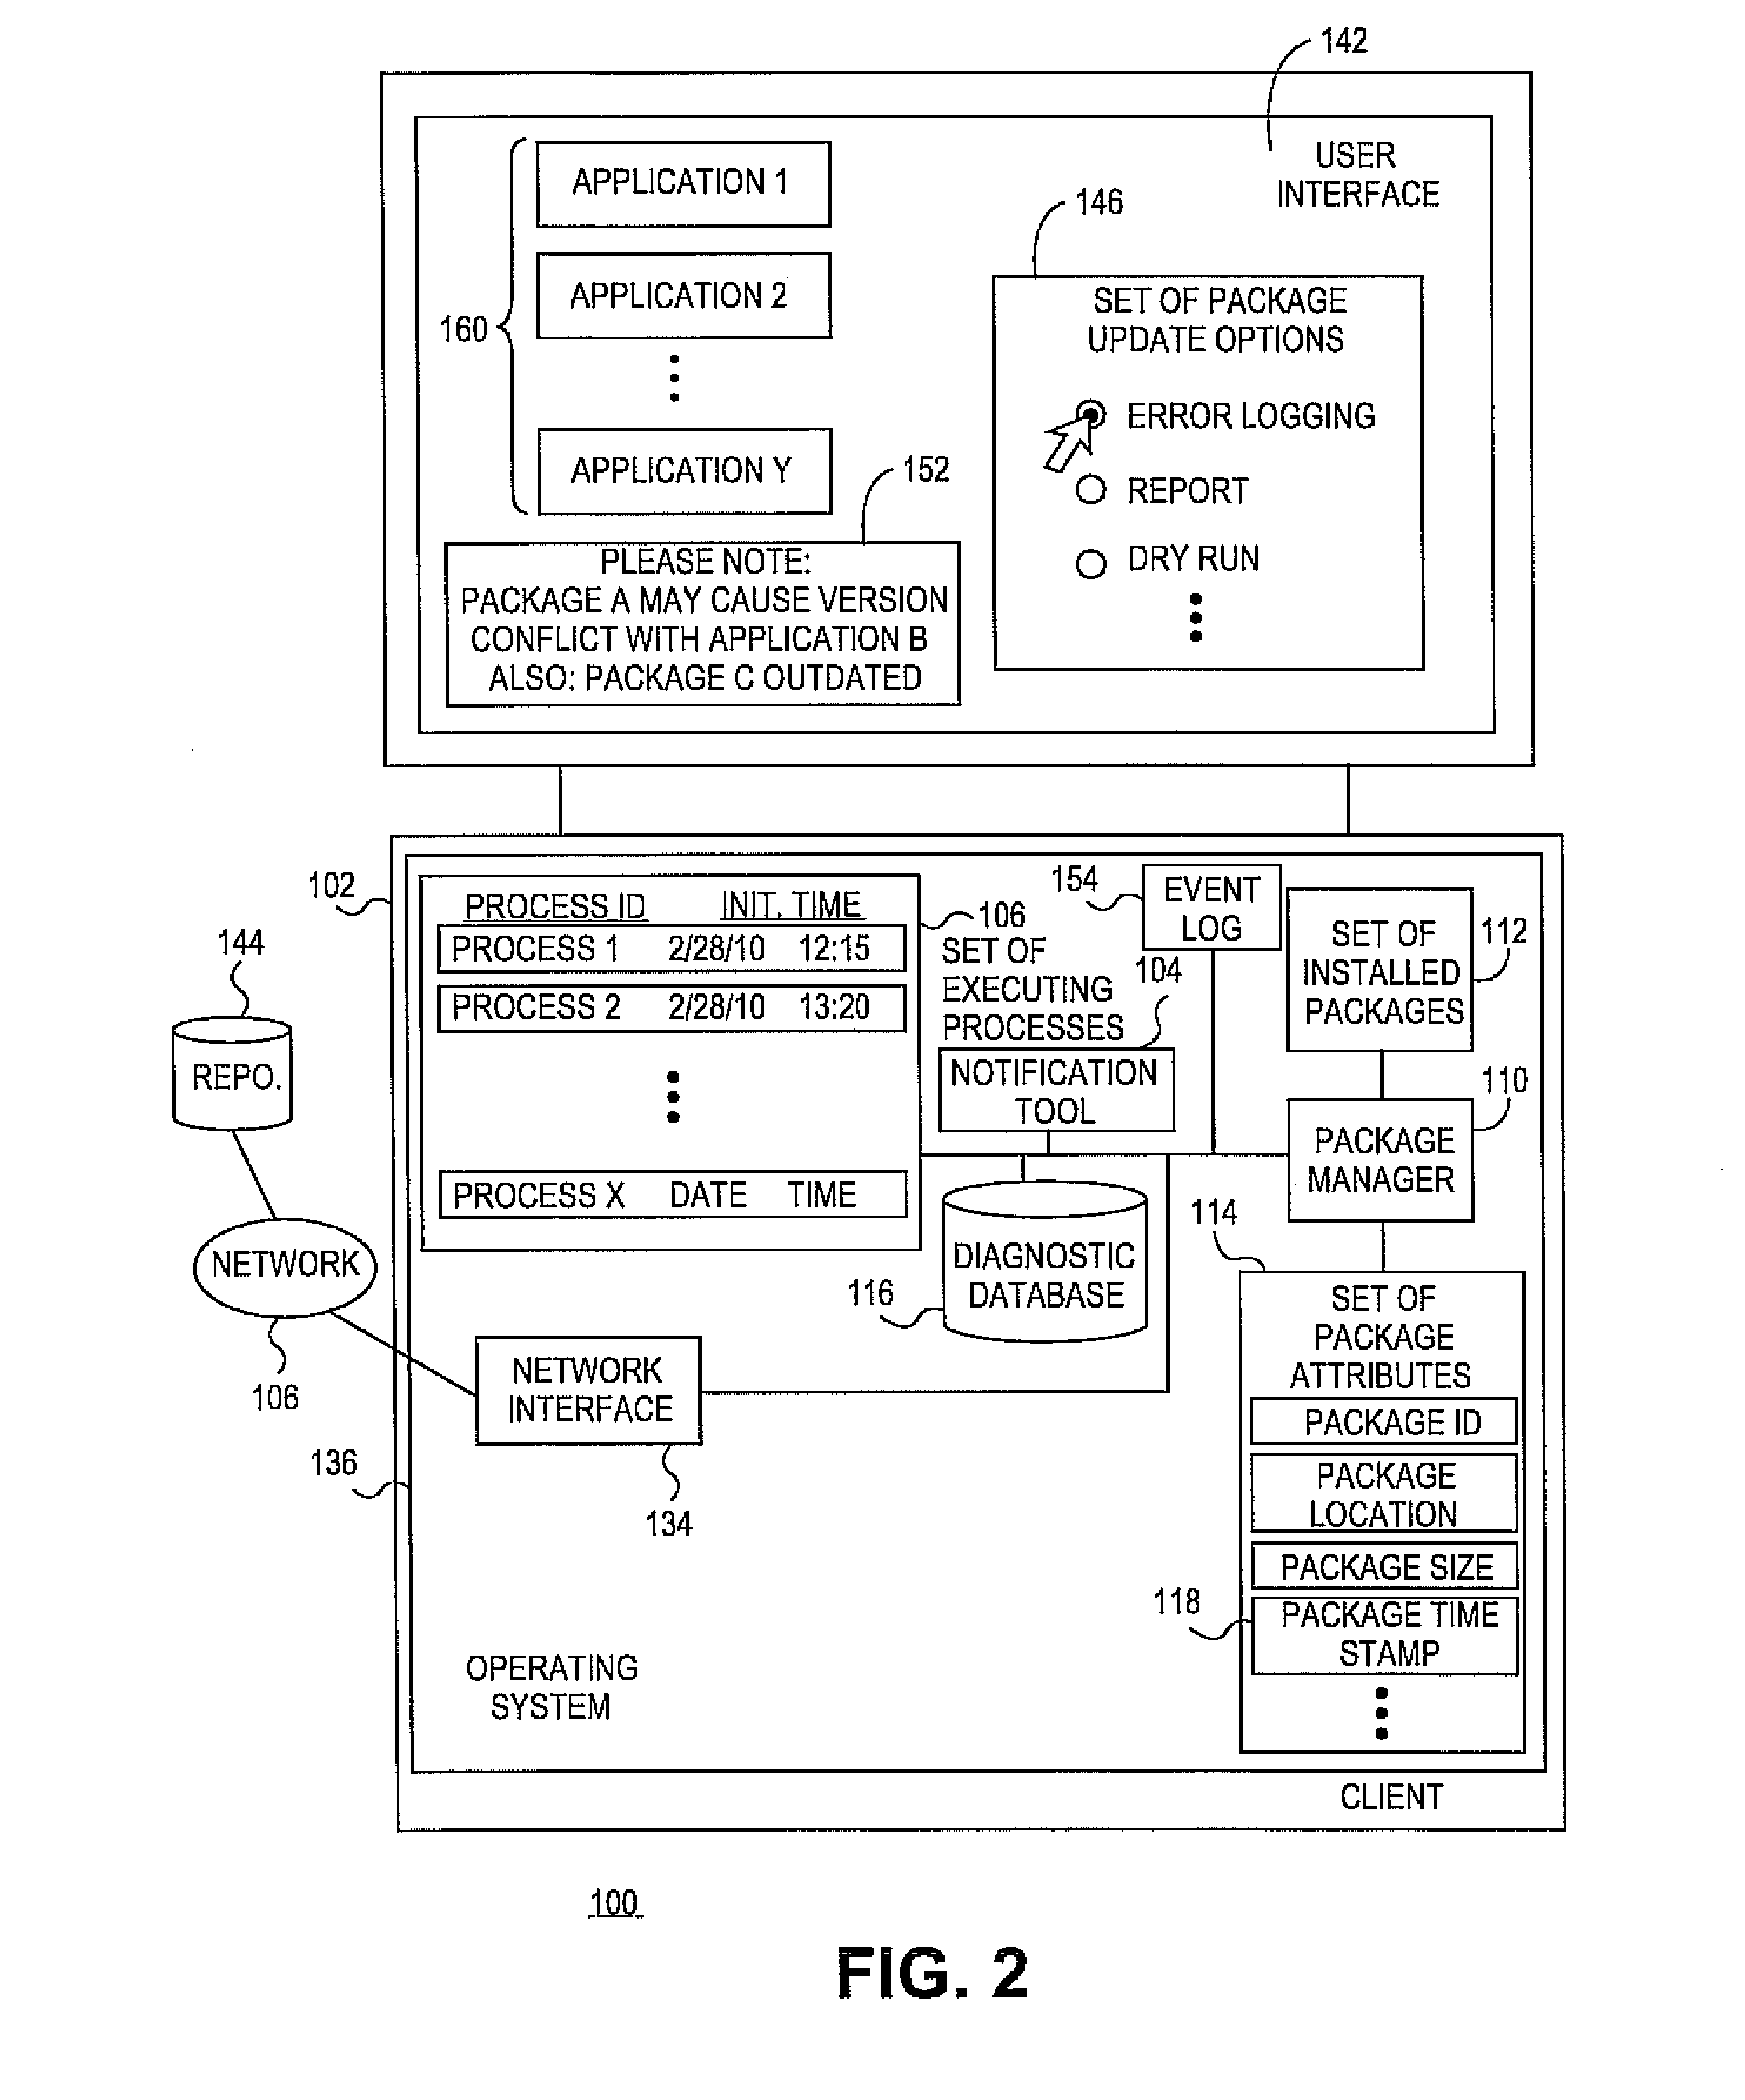 Systems and methods for initiating software repairs in conjunction with software package updates